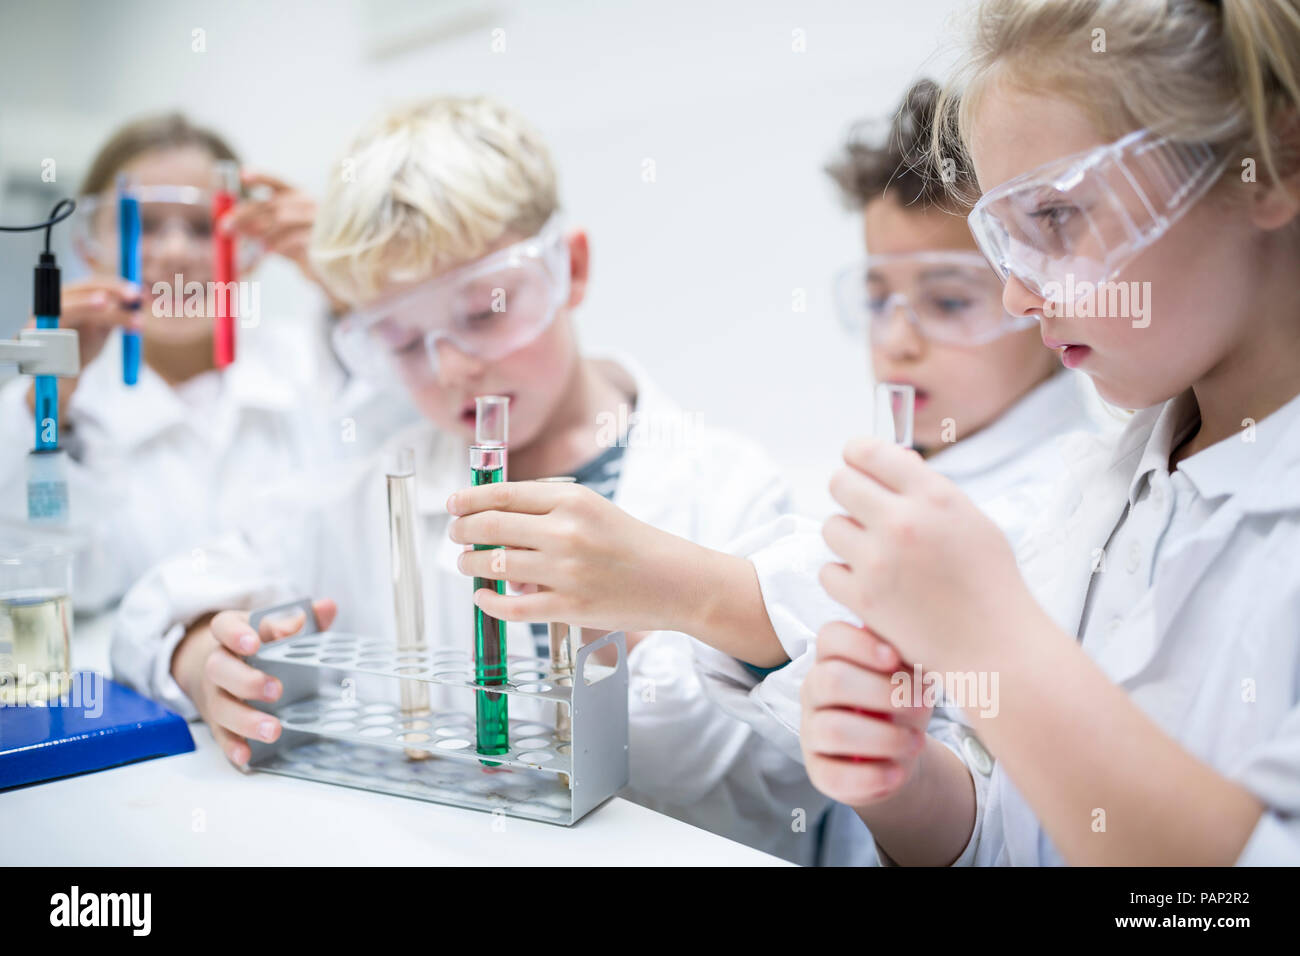 Pupils in science class experimenting with liquids in test tubes Stock Photo